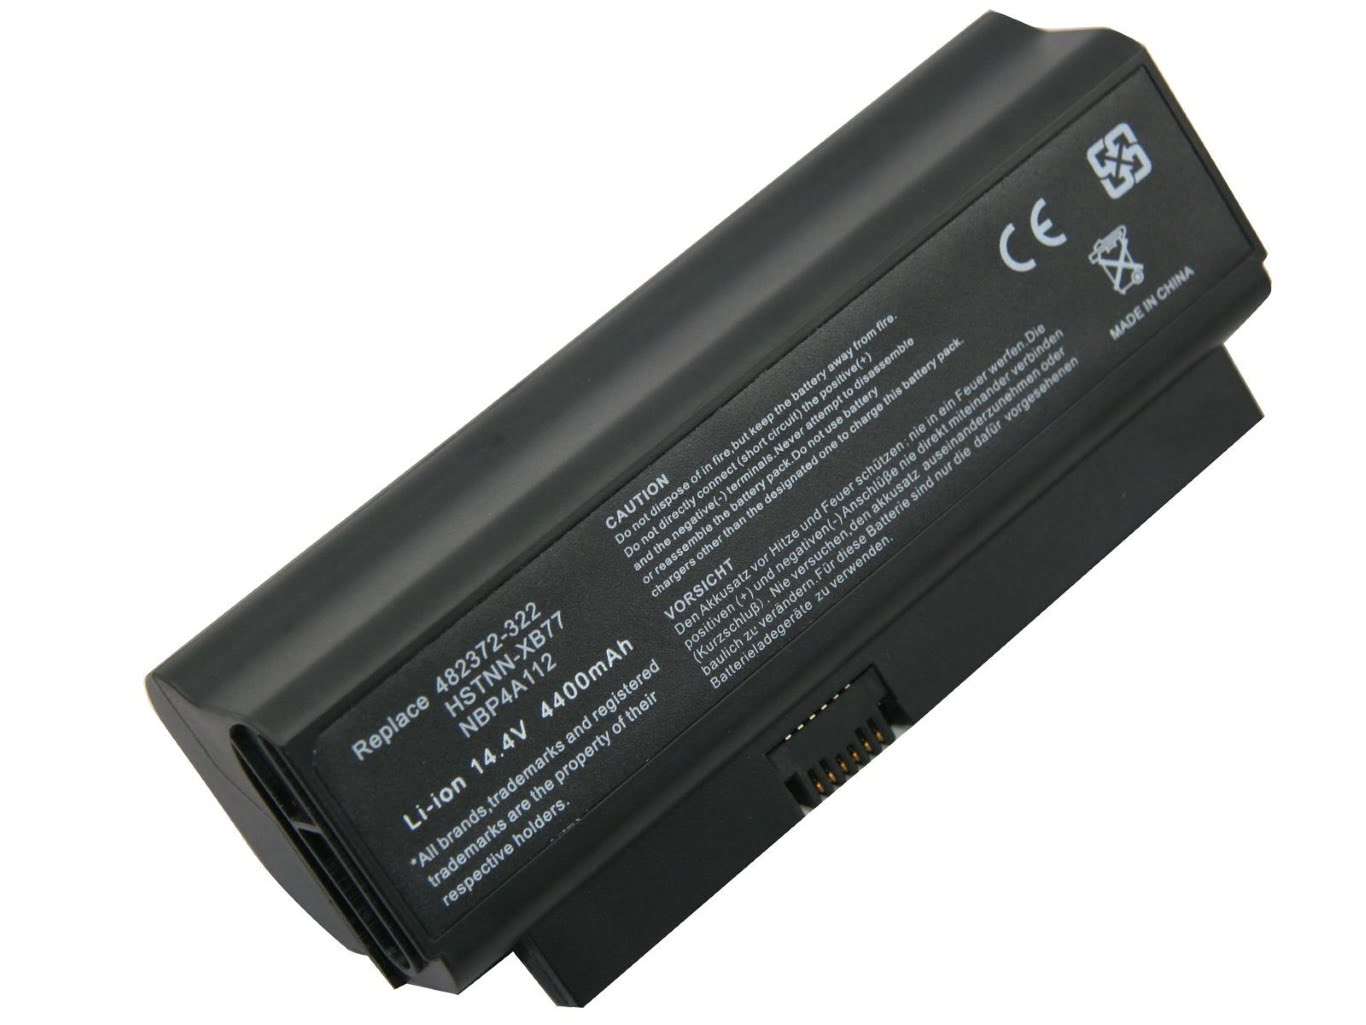 482372-322, 482372-361 replacement Laptop Battery for HP Business Notebook 2230s, 8 cells, 14.8 V, 4400mAh